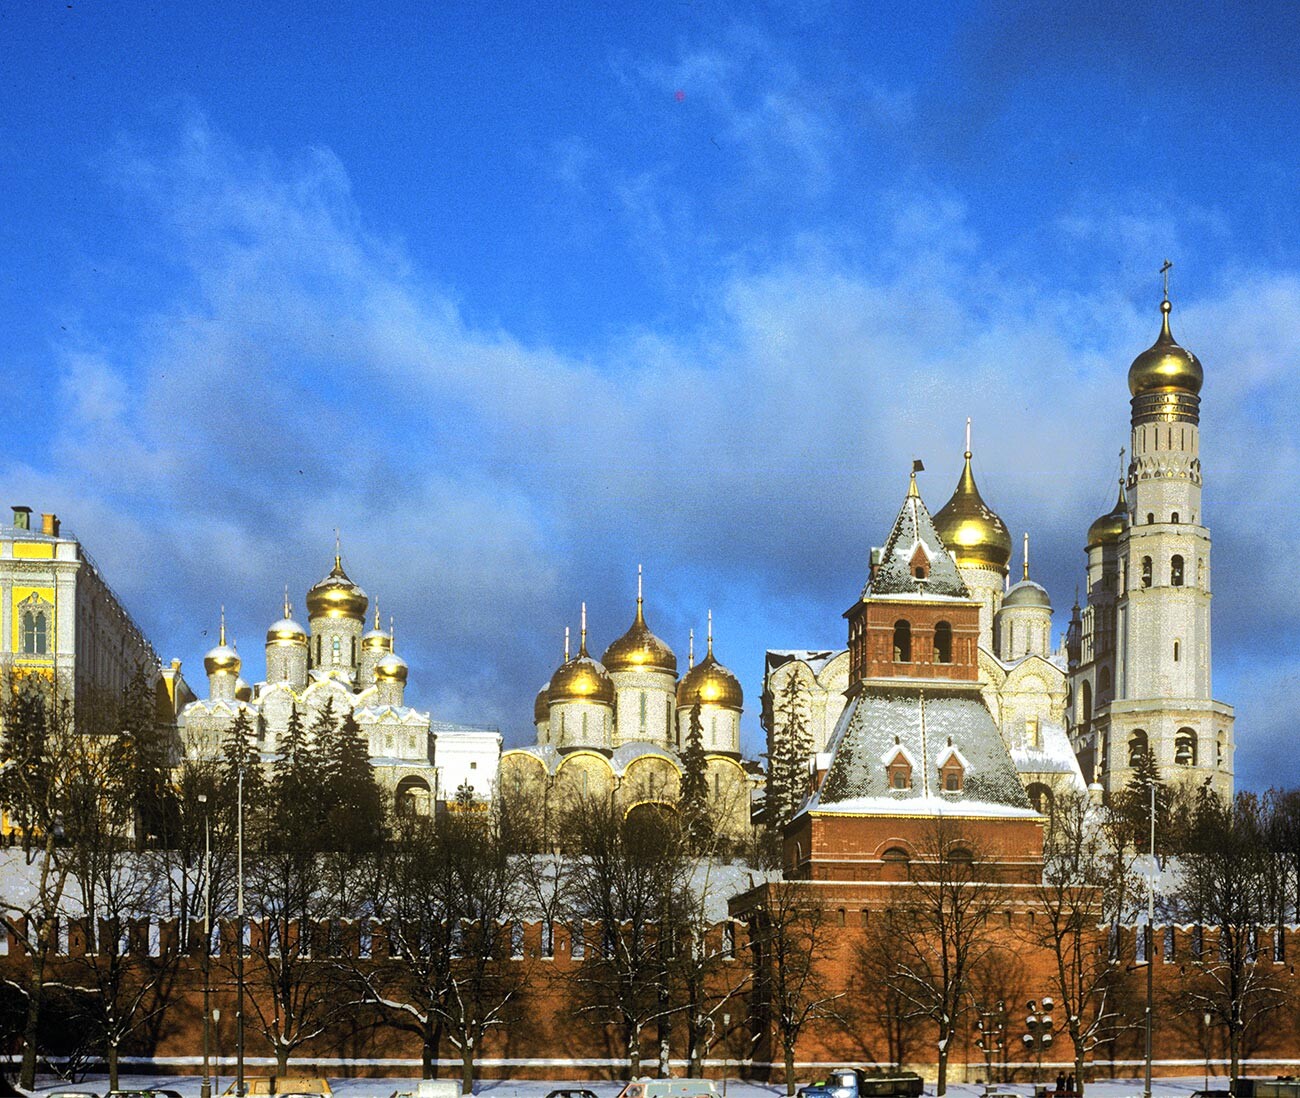 Moscow Kremlin. South view from Sophia Embankment across Moscow River. From left: Annunciation Cathedral, Dormition Cathedral, Archangel Michael Cathedral, Bell Tower of Ivan the Great. December 29, 1987